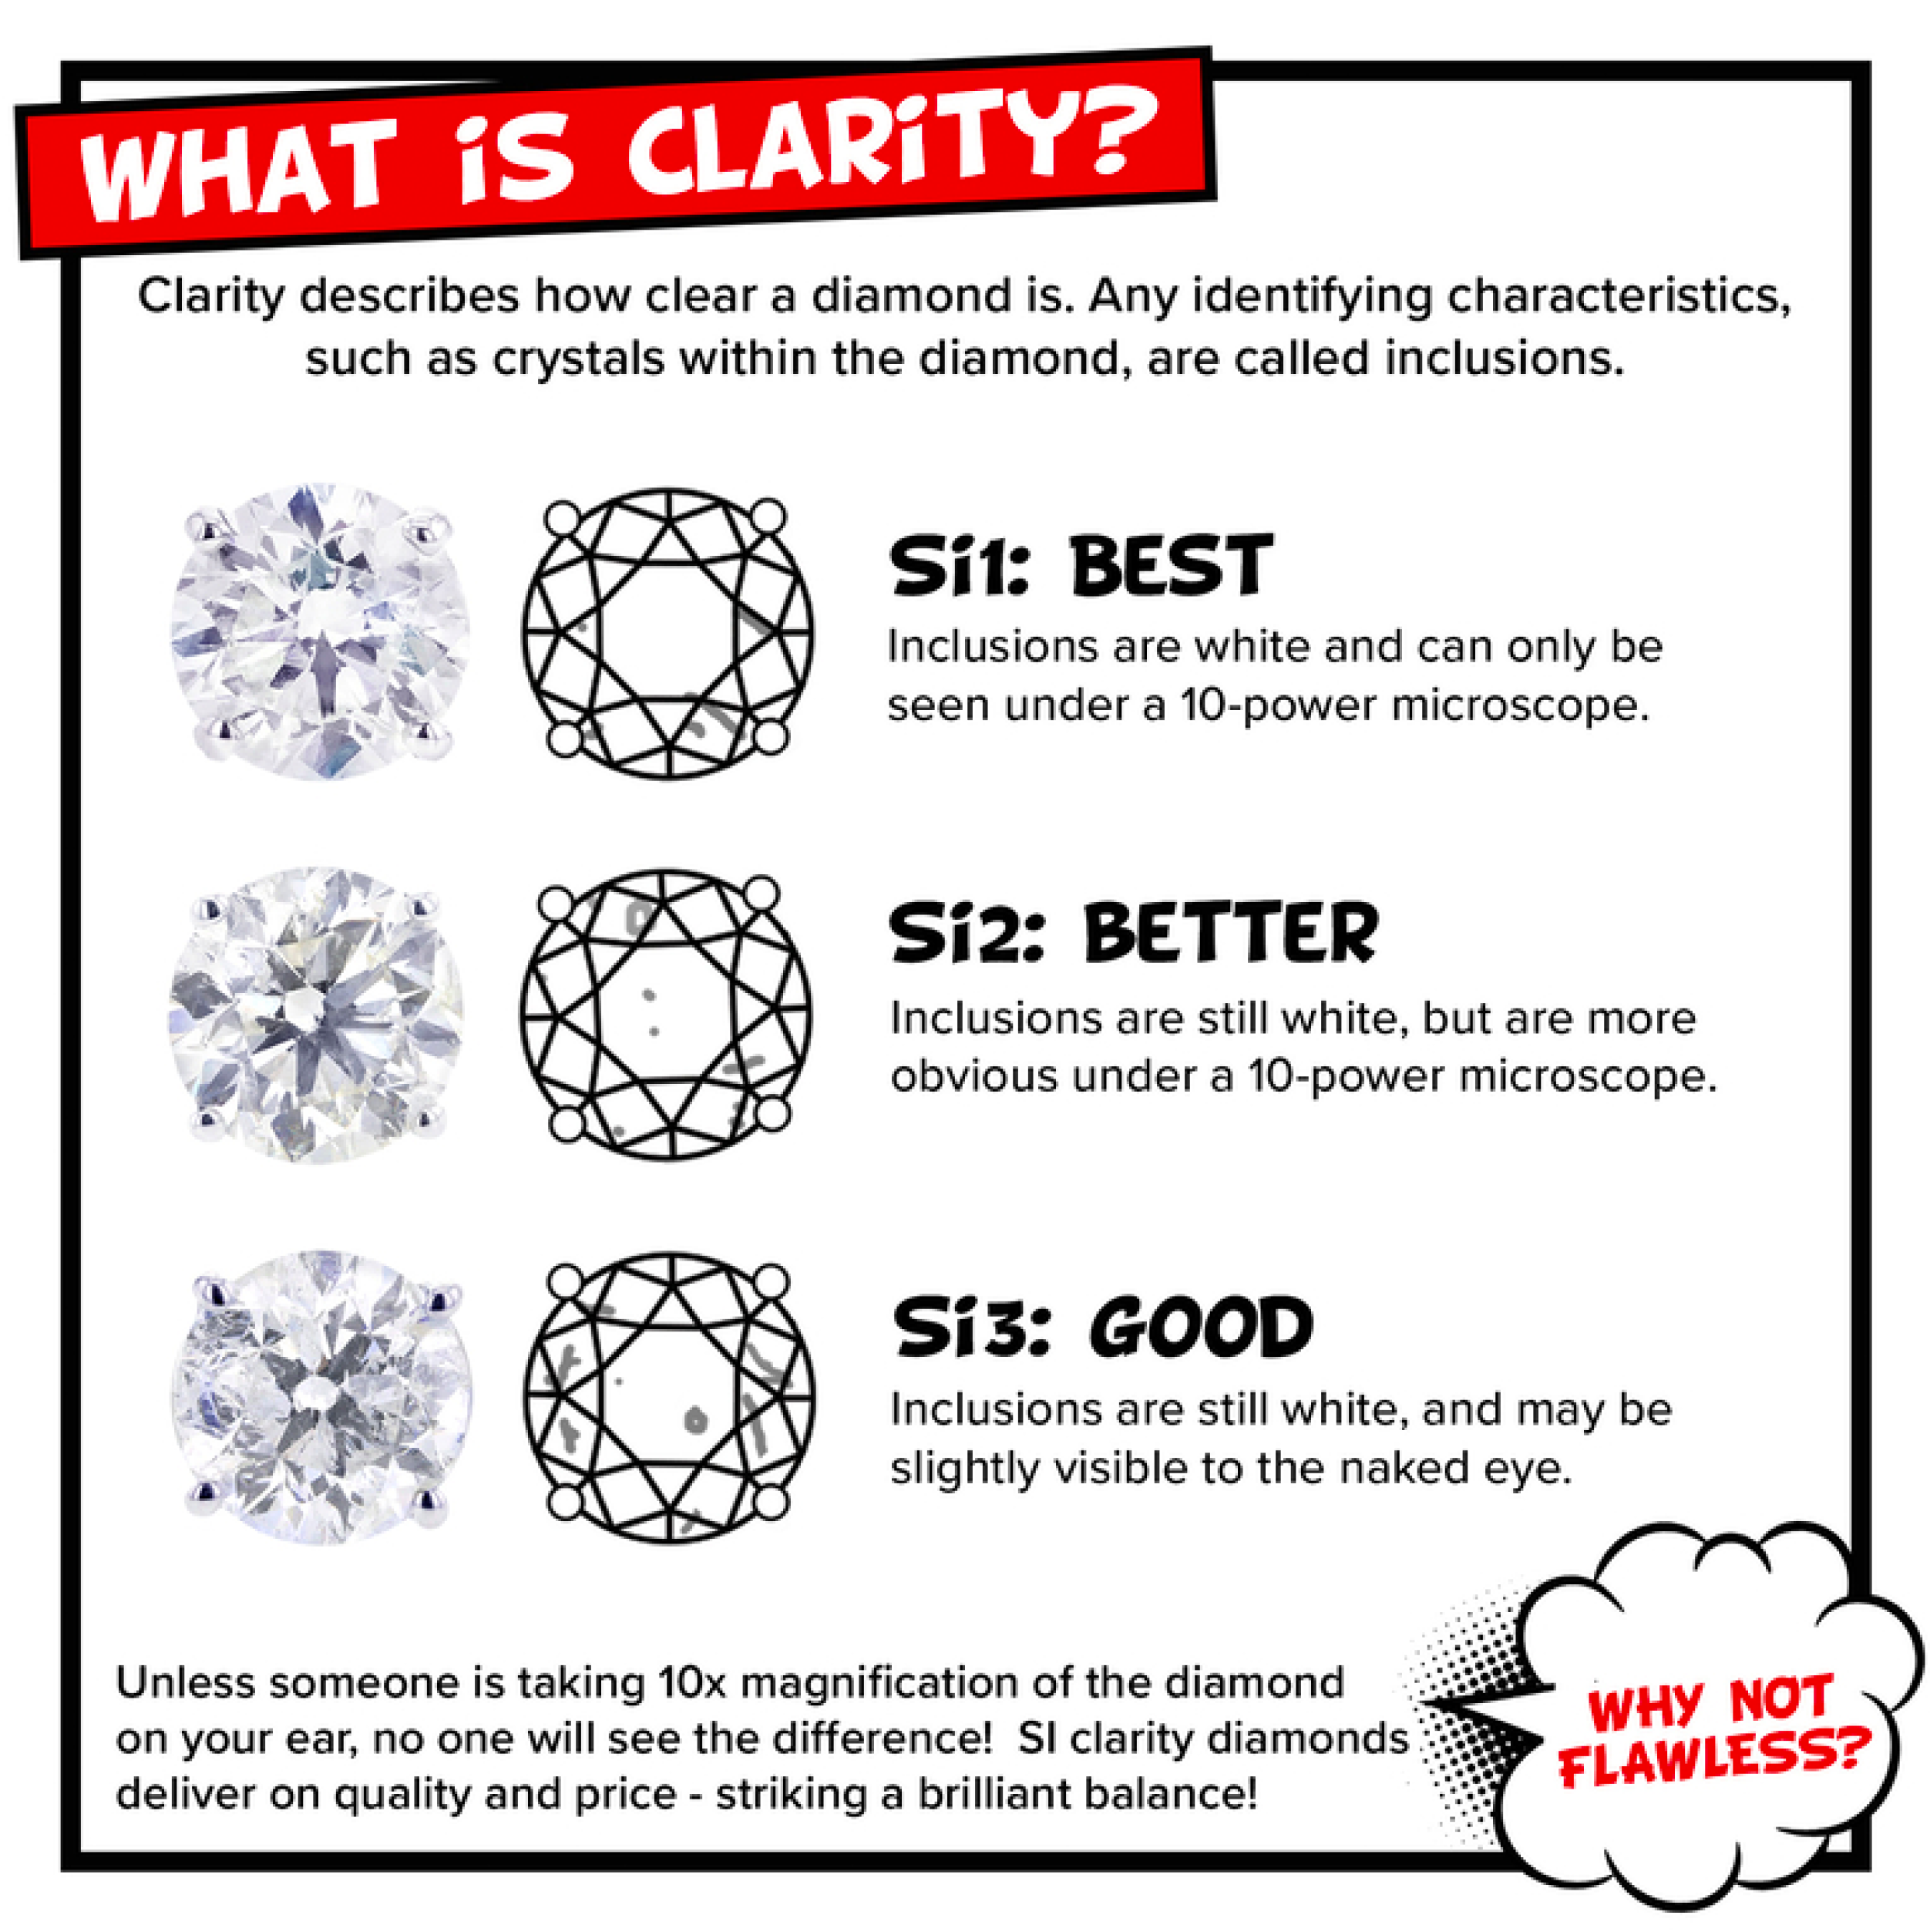 Three diamonds representing the different clarity levels with explanations.